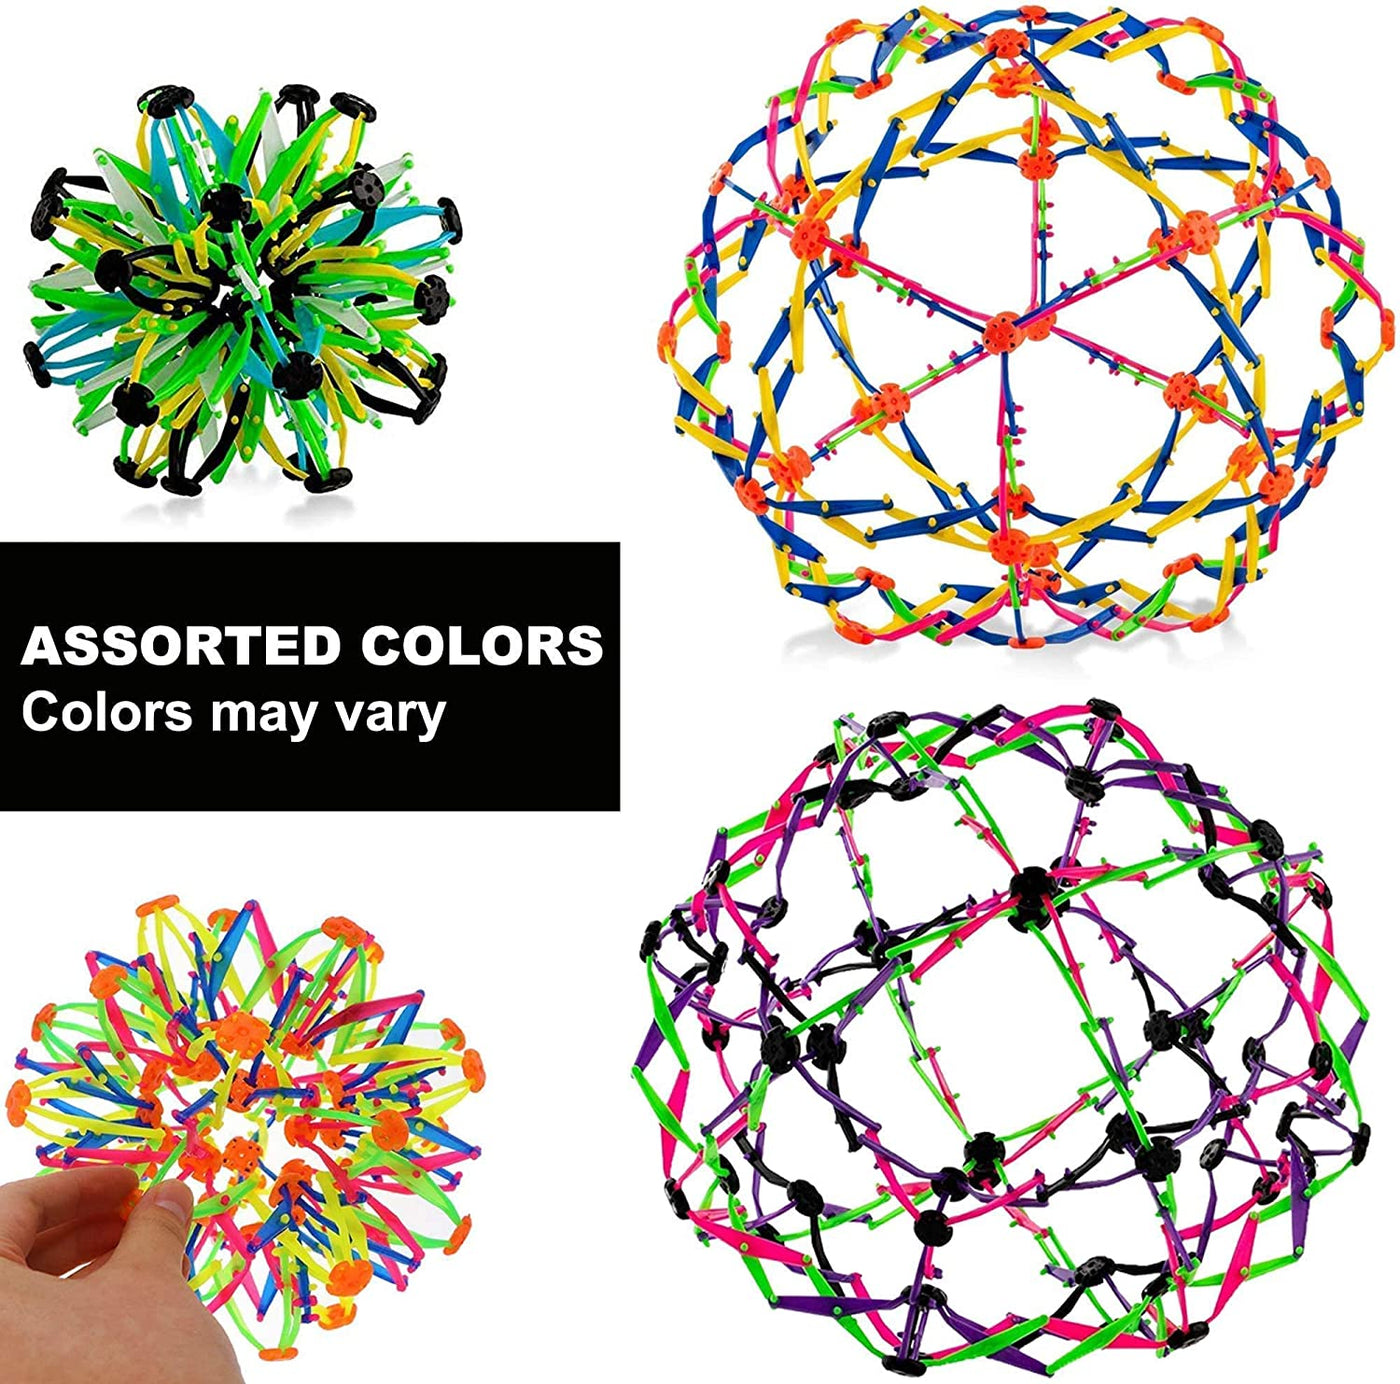 4E's Novelty Expandable Ball, Plastic Sensory Sphere for Kids and Adults